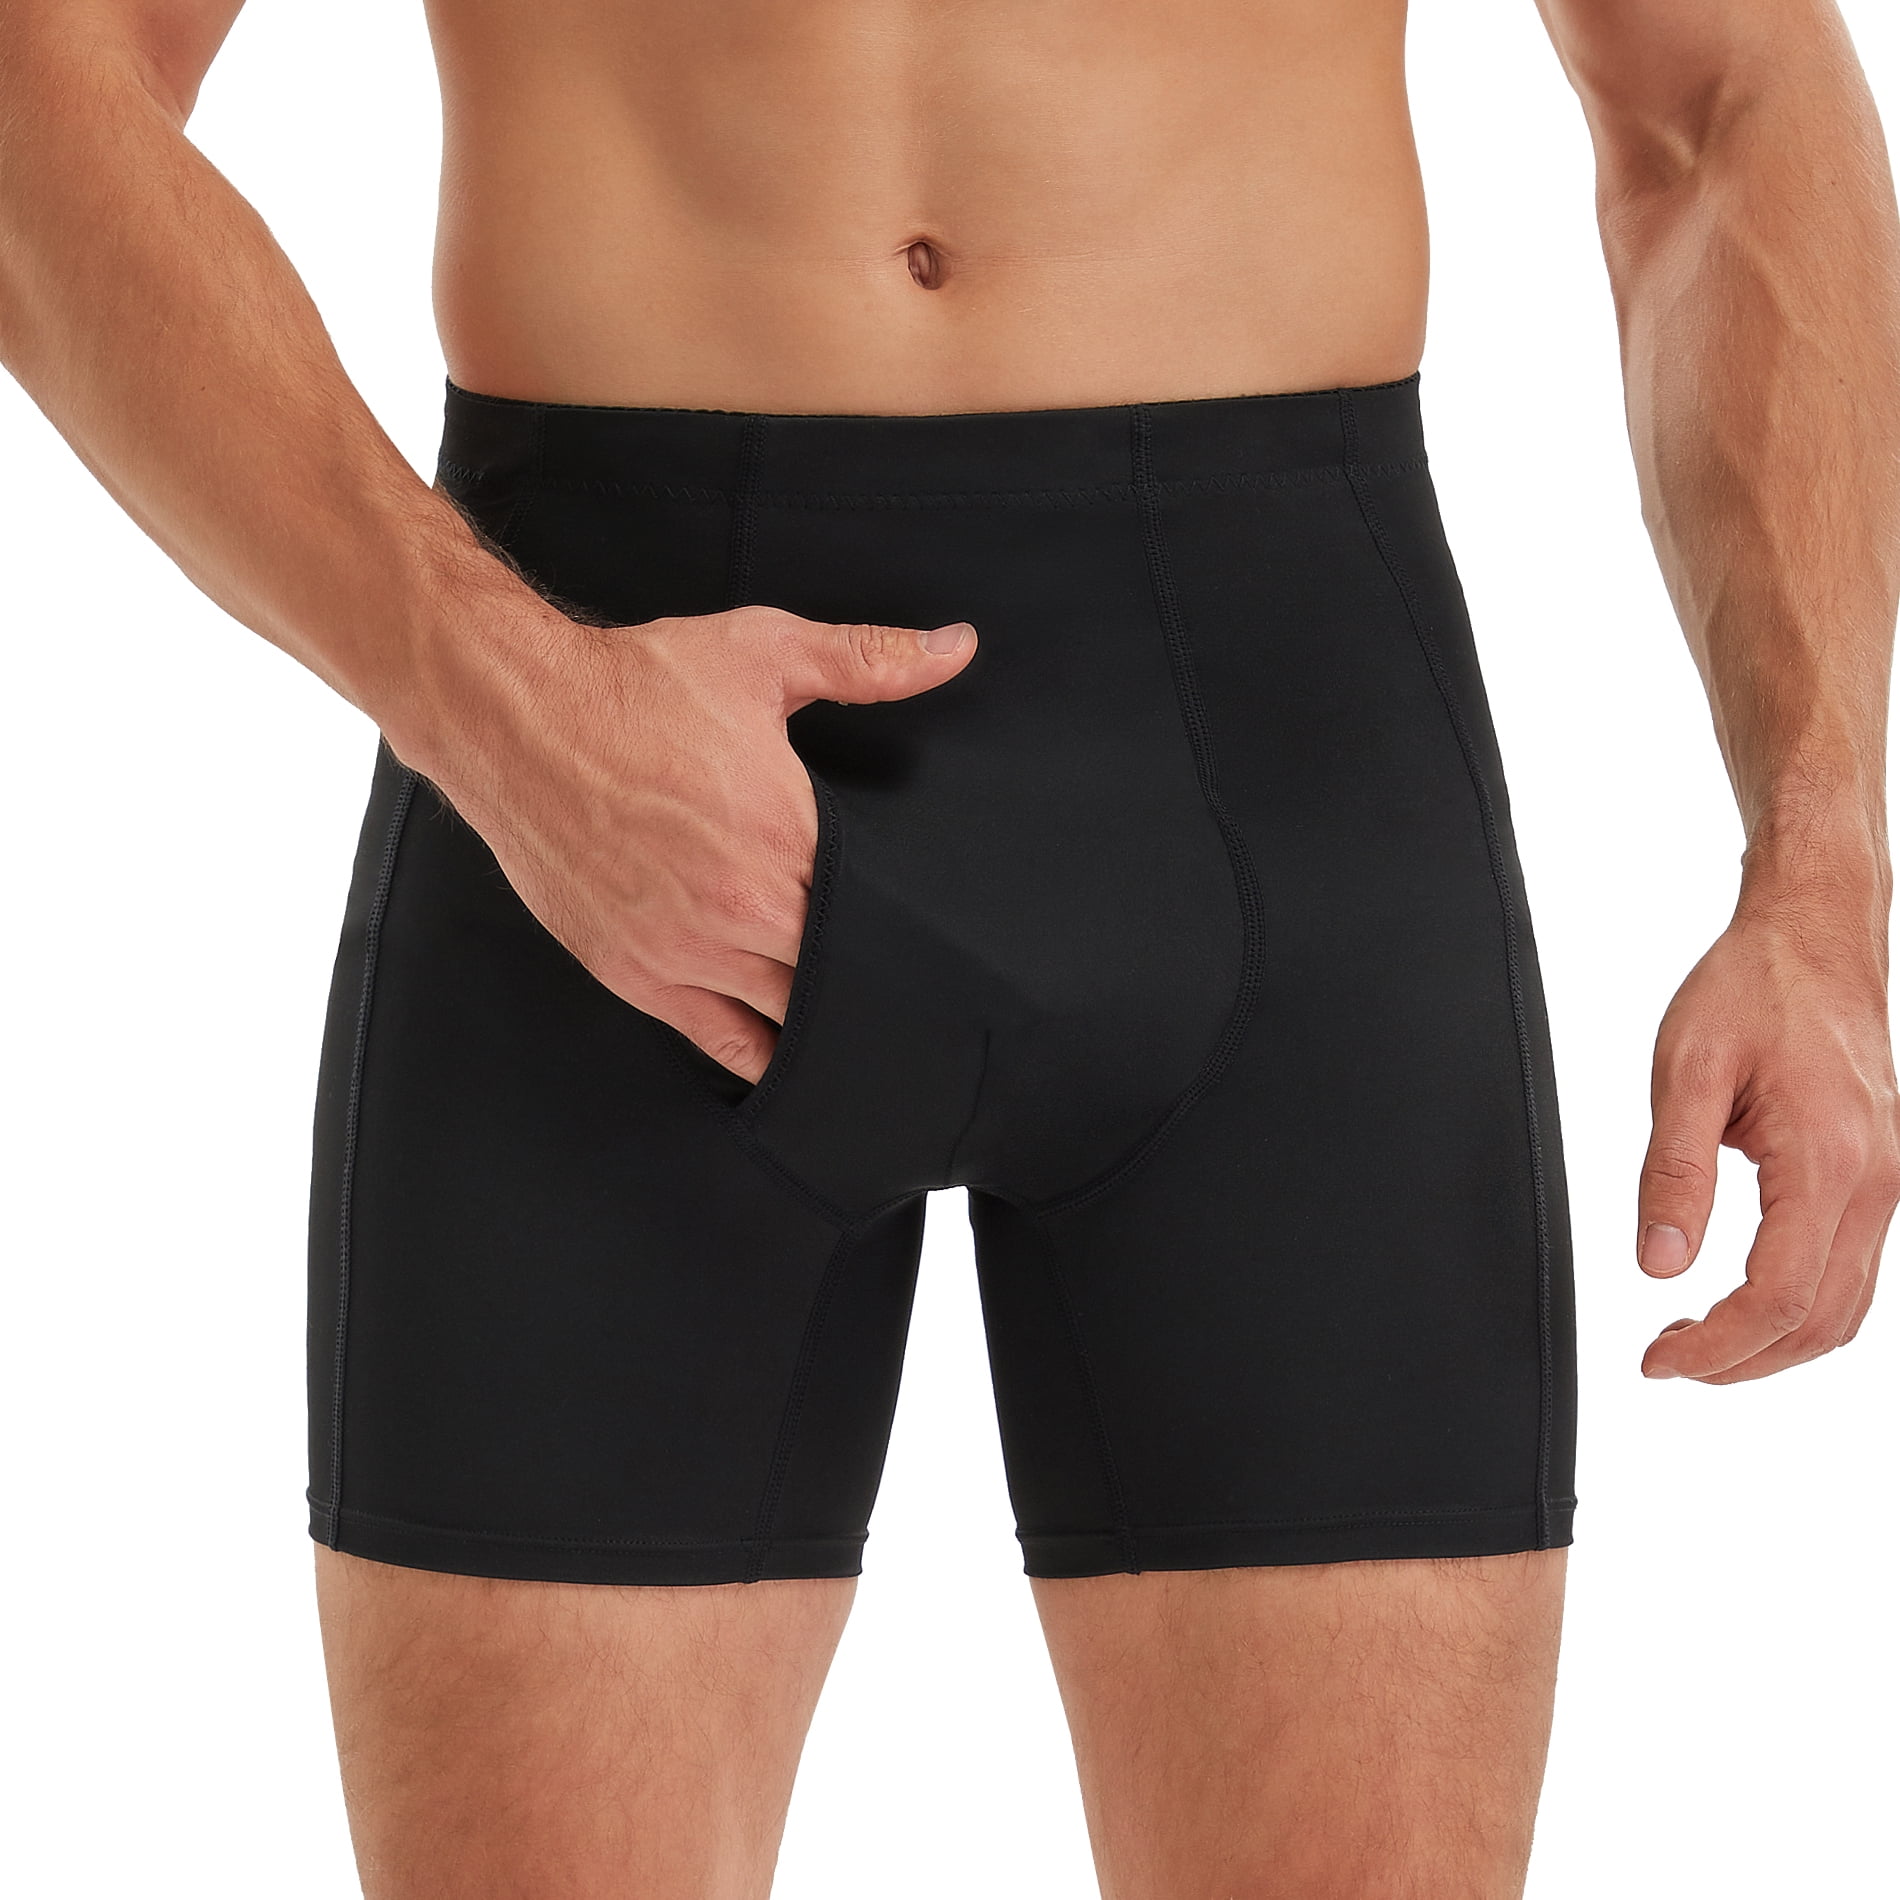 Gotoly Underwear Boxer Briefs For Men with Removable Padded Tummy